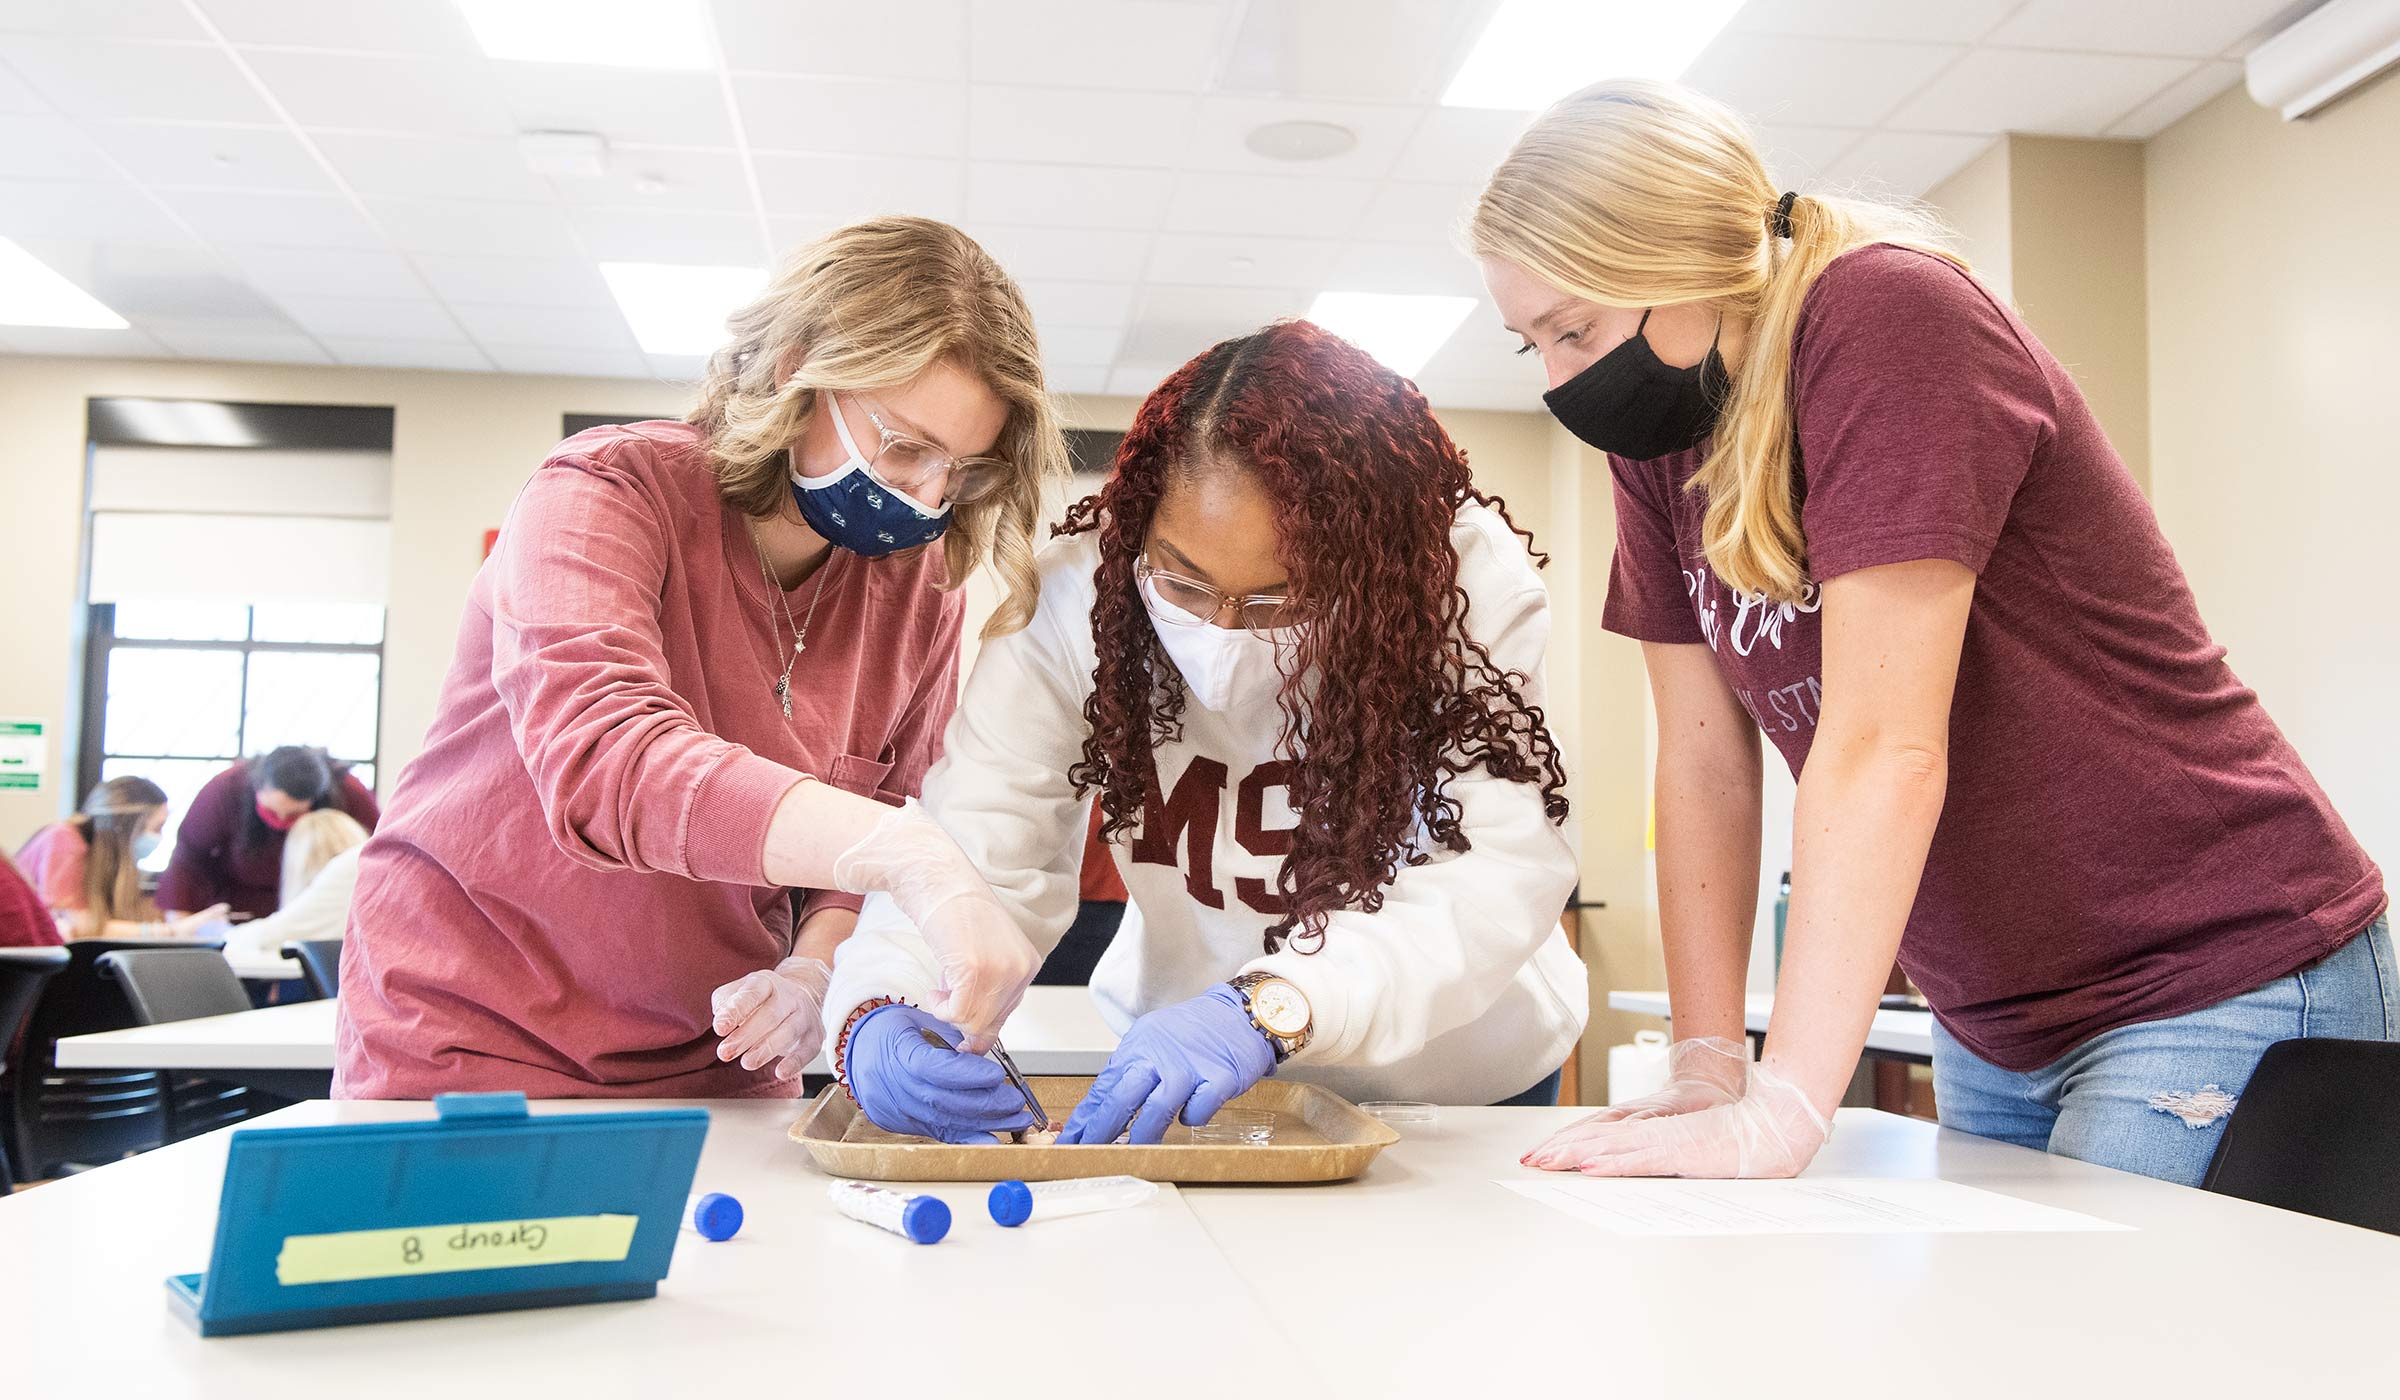 Female student in maroon, female student in white sweatshirt, and another female student in maroon leaning over tray on table